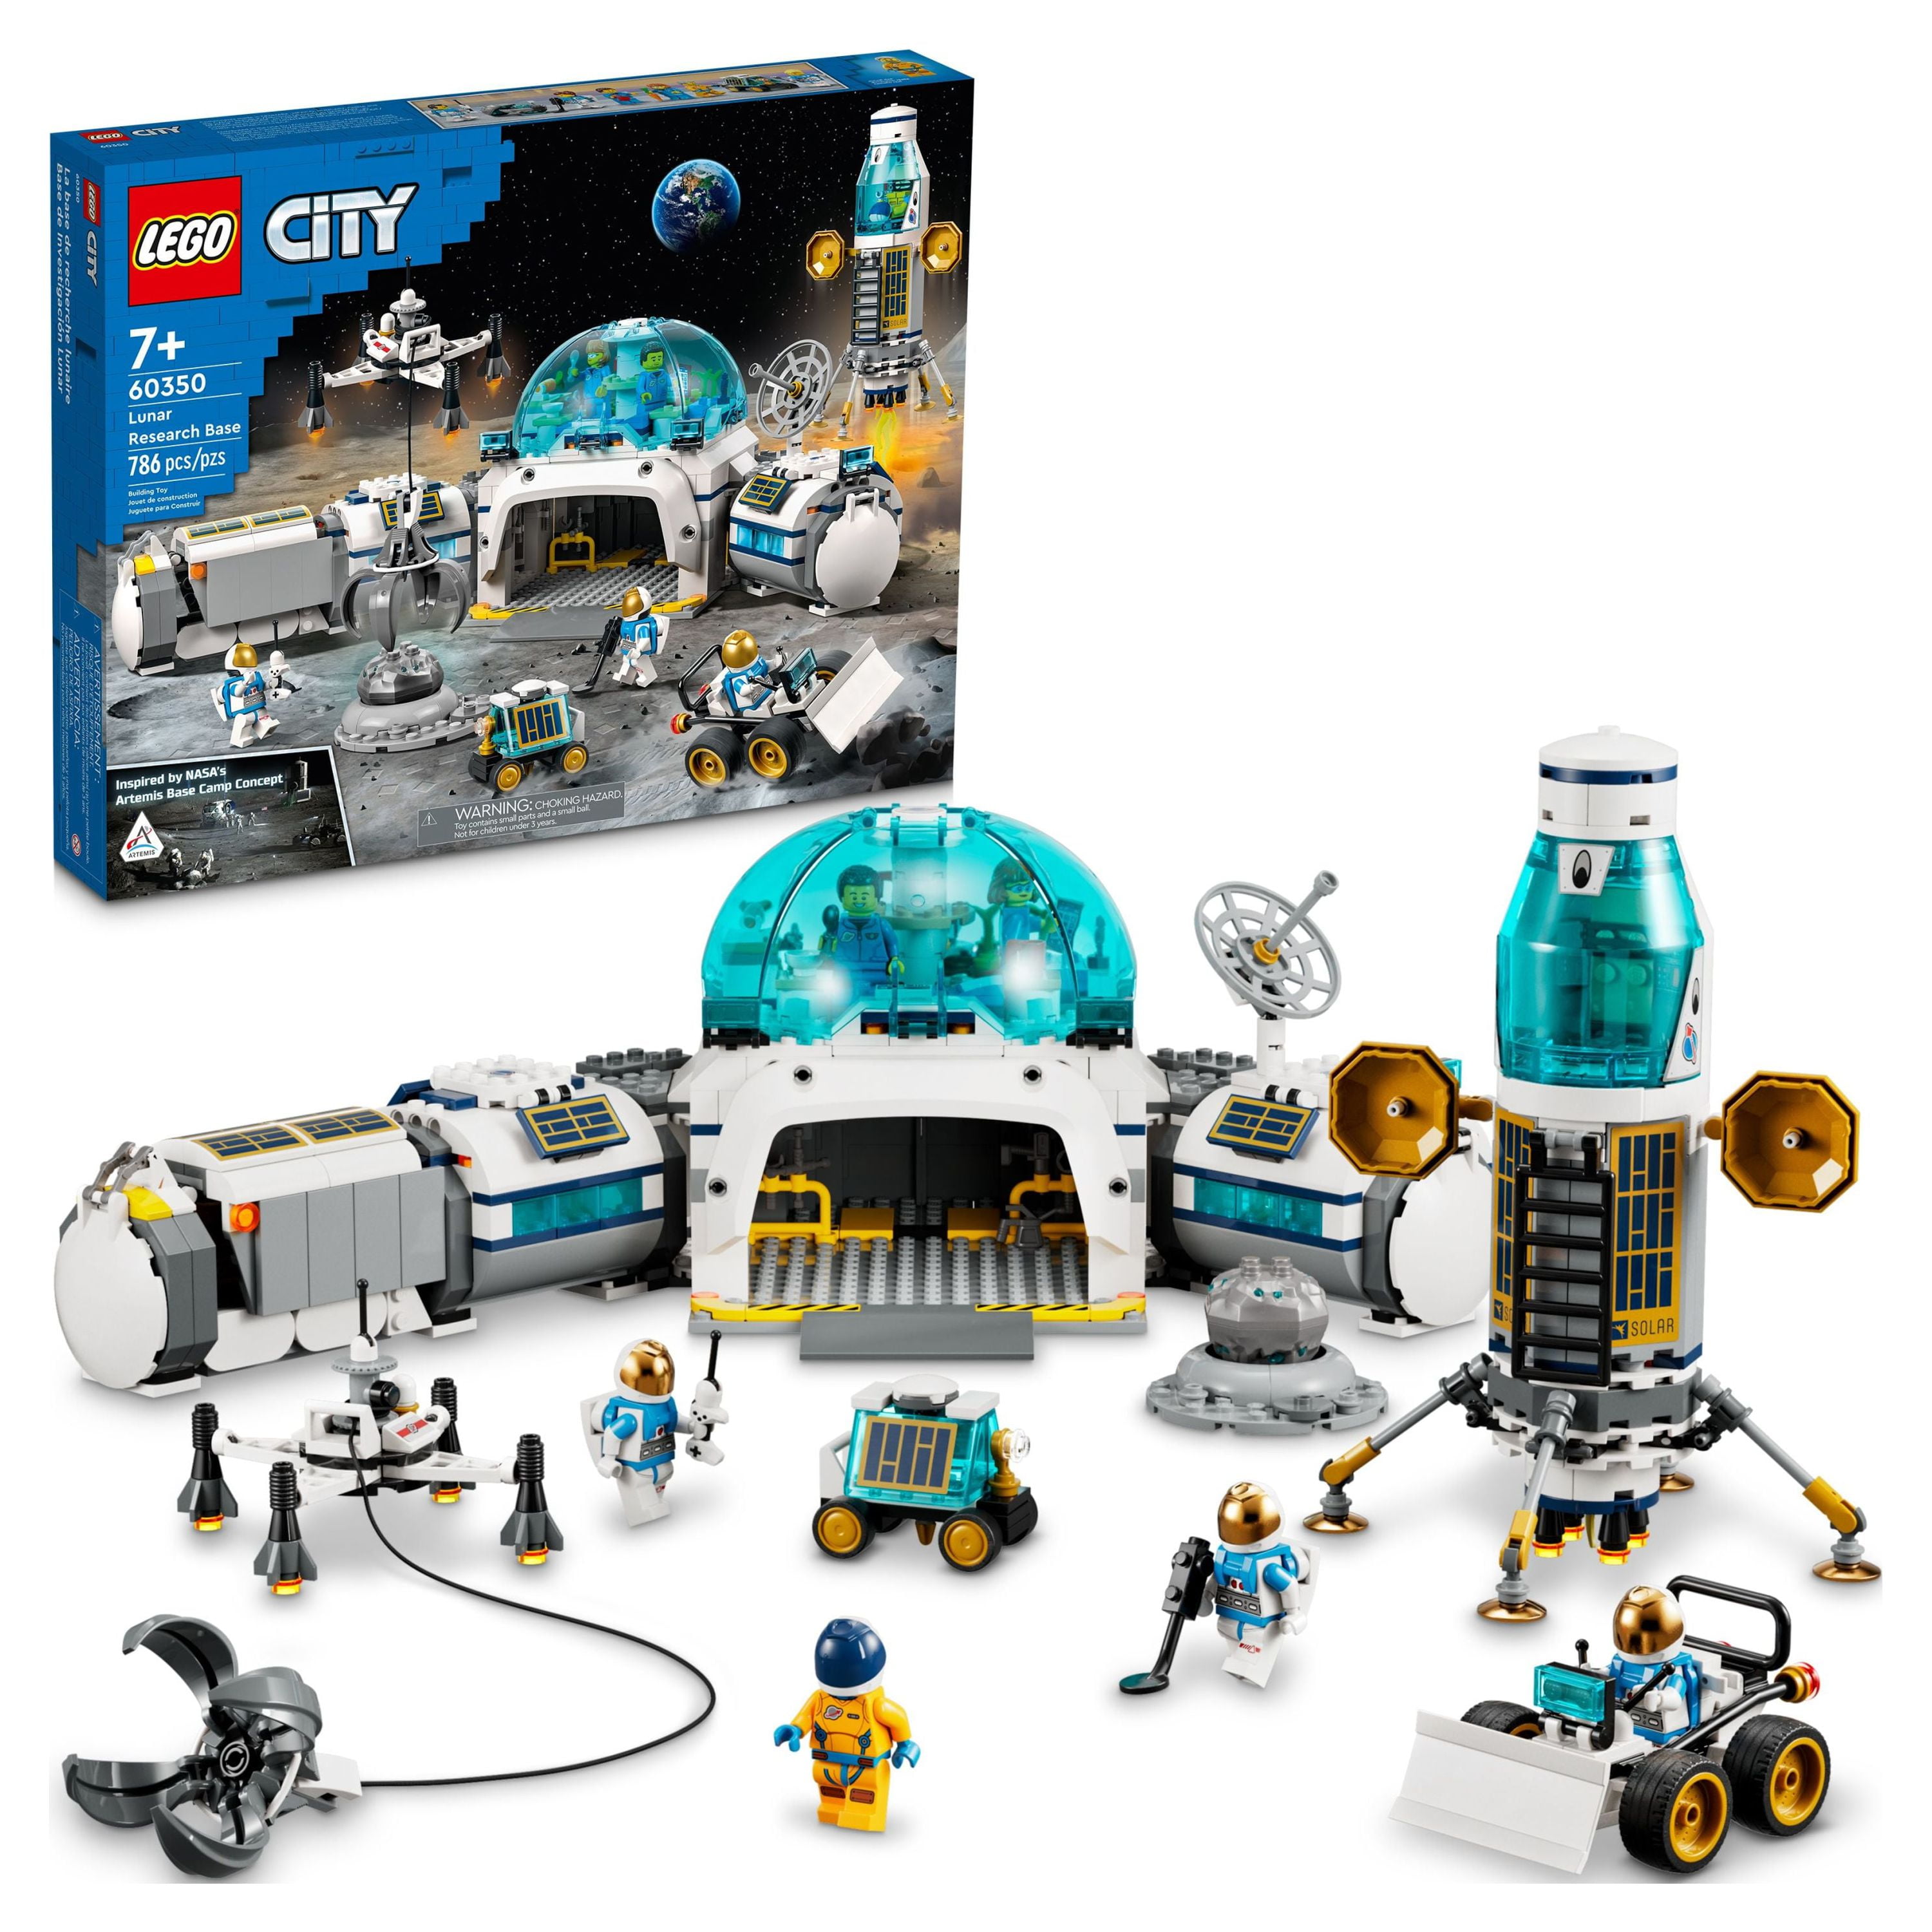 LEGO City Lunar Research Base 60350 Outer Space Toy for Kids Ages 7 Plus,  Build and Play Kit with NASA Inspired Lunar Lander, Rover and Moon Buggy,  Includes 6 Astronaut Minifigures 